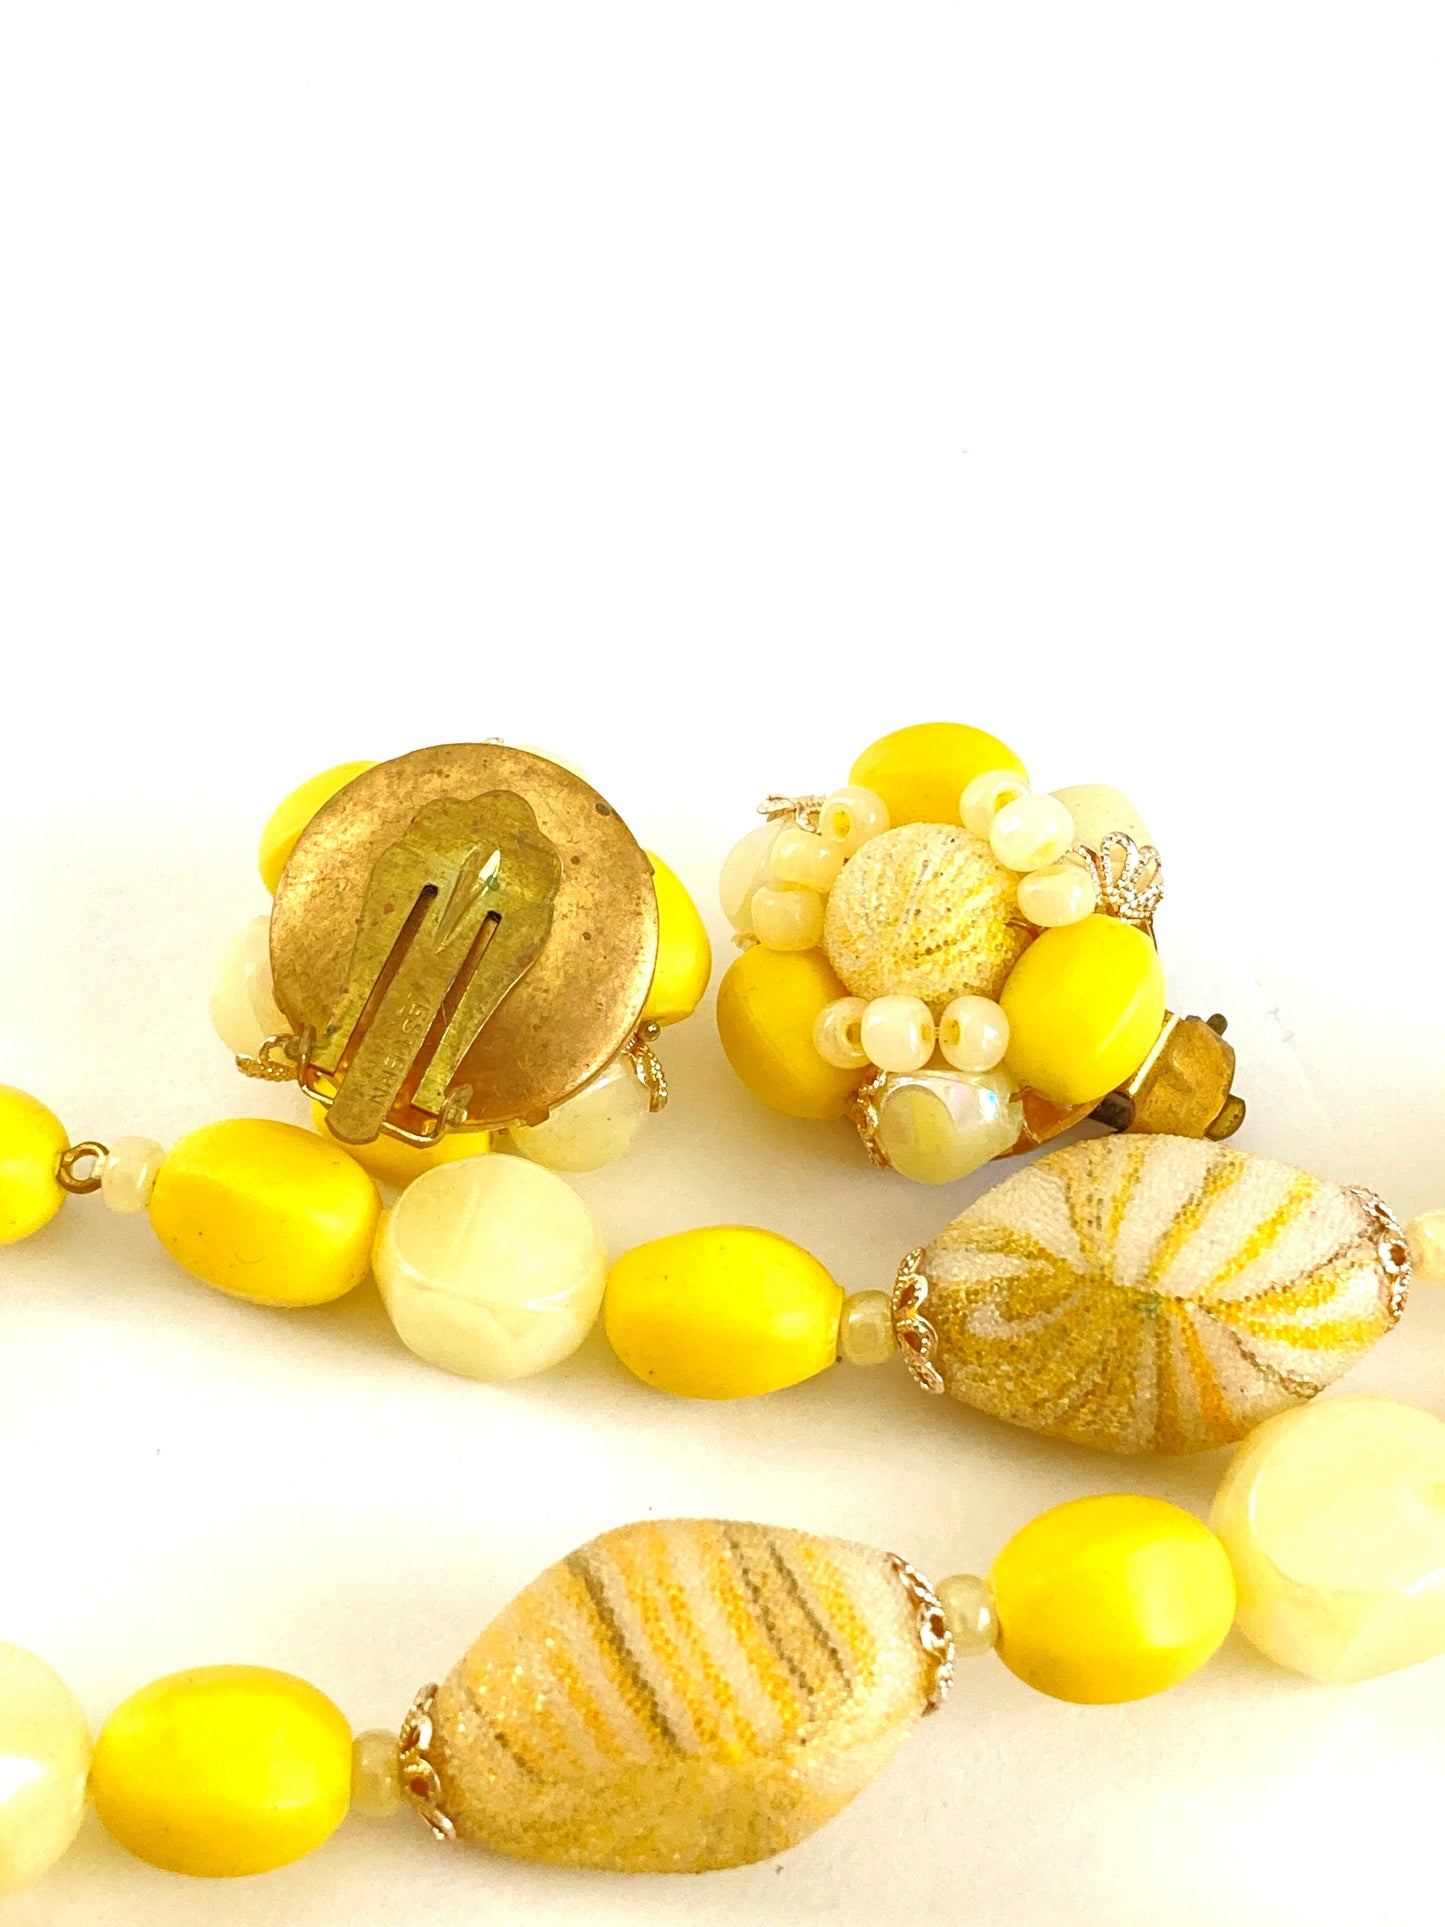 Lemon Yellow Beaded Necklace and Earrings Set 1960s West Germany